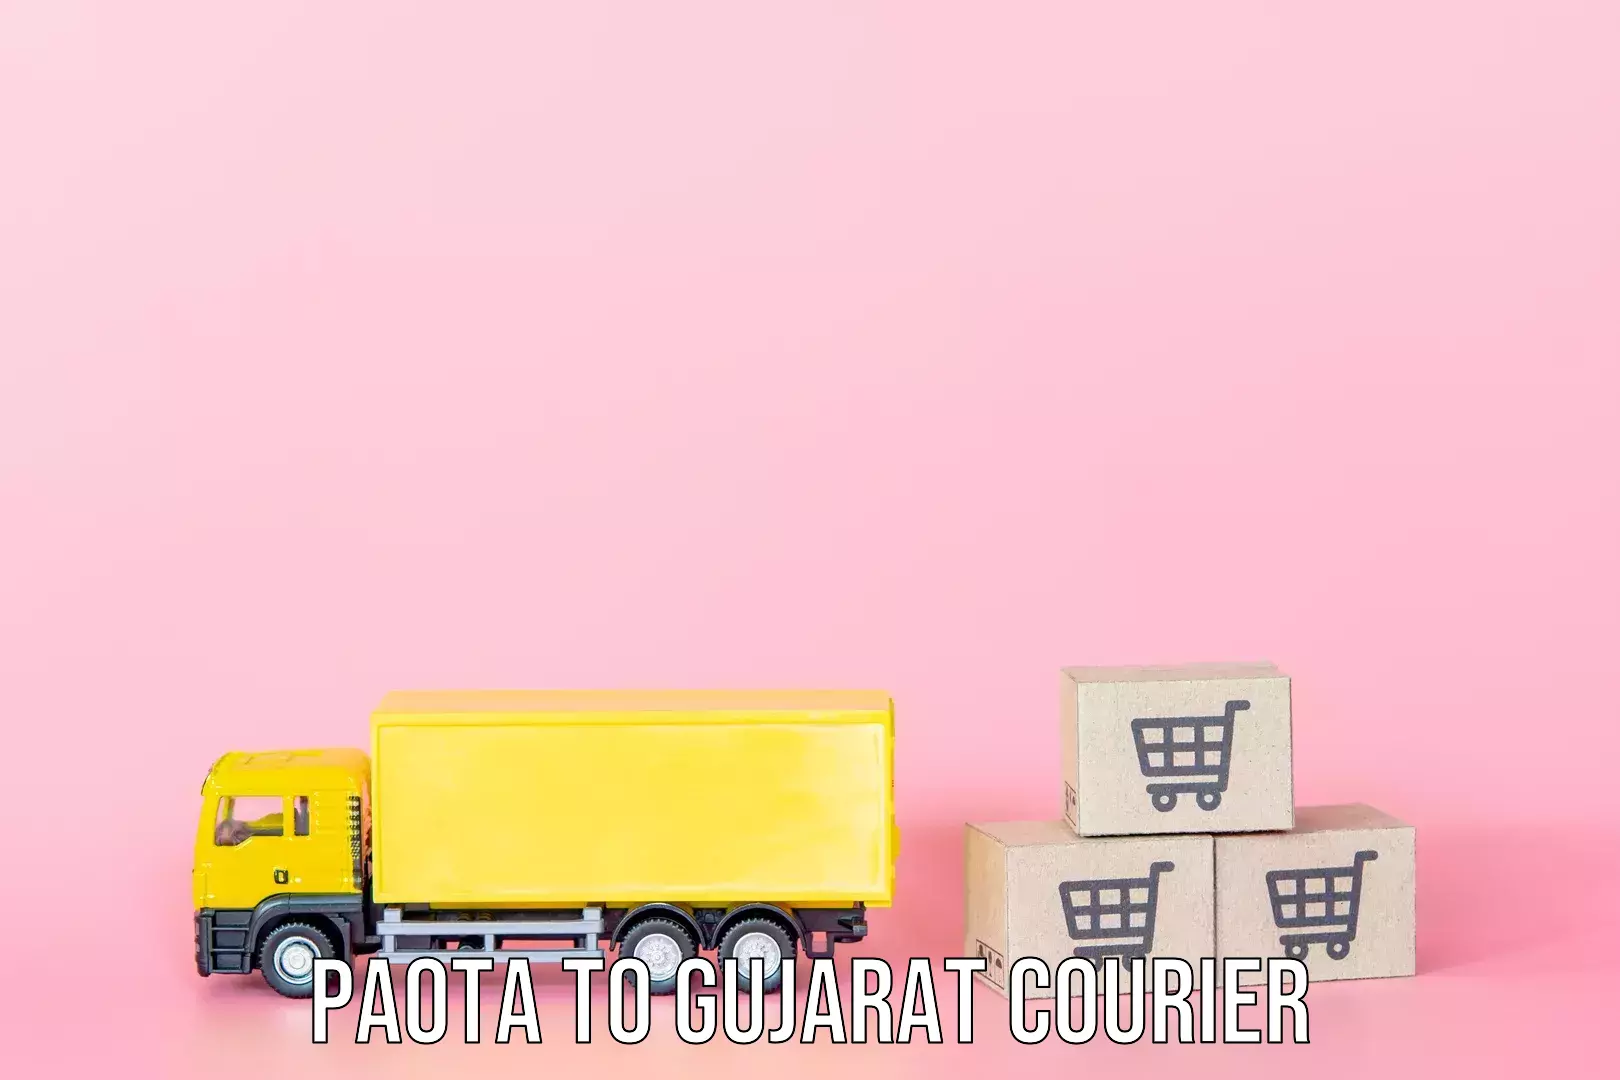 Luggage transport schedule Paota to Surat